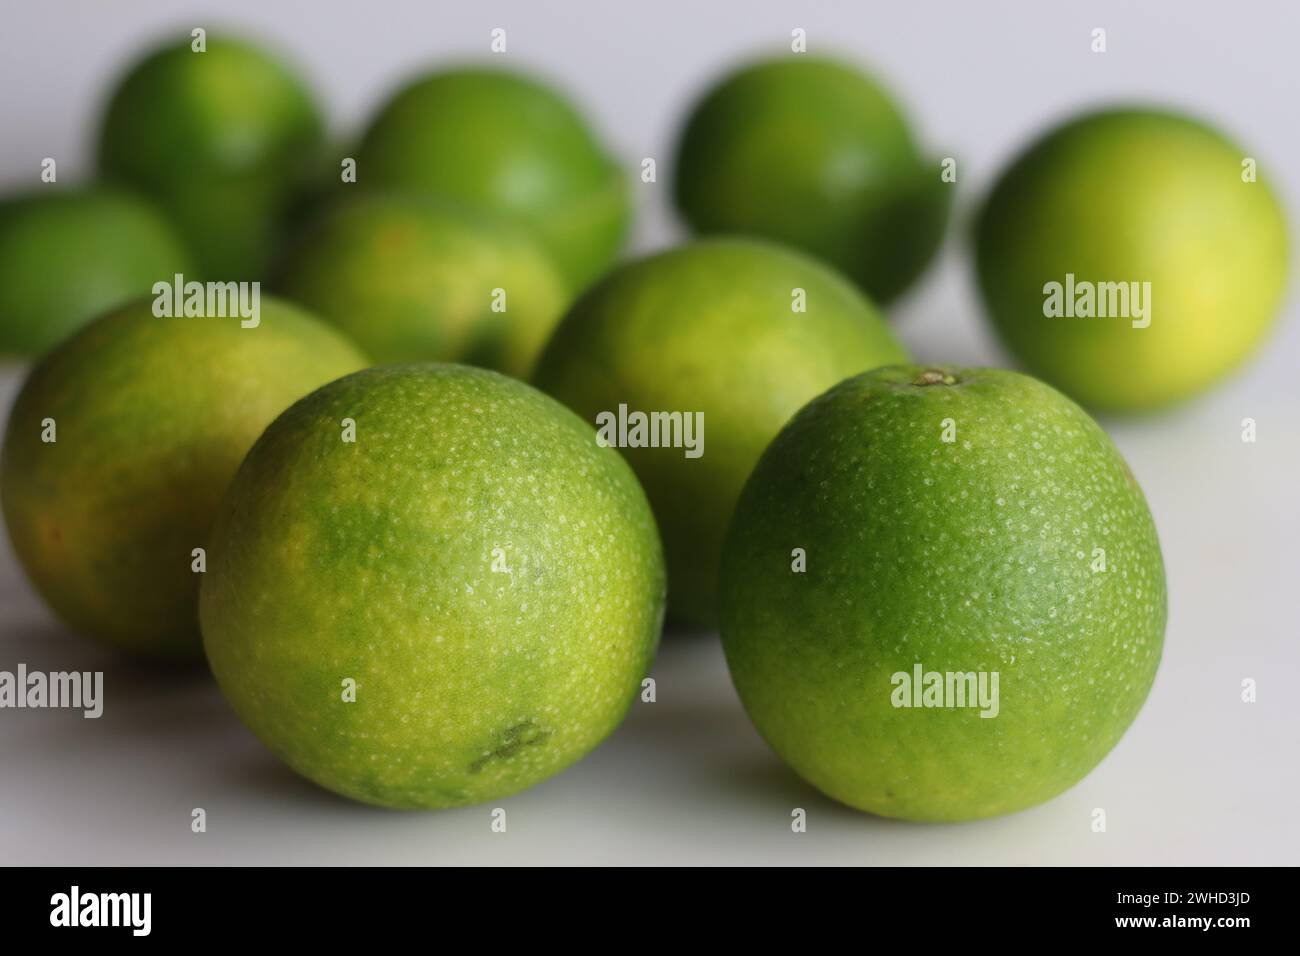 Orchard of fresh sweet limes, vibrant citrus fruits on white background. Healthy organic produce, juicy green limes for cooking and beverages Stock Photo